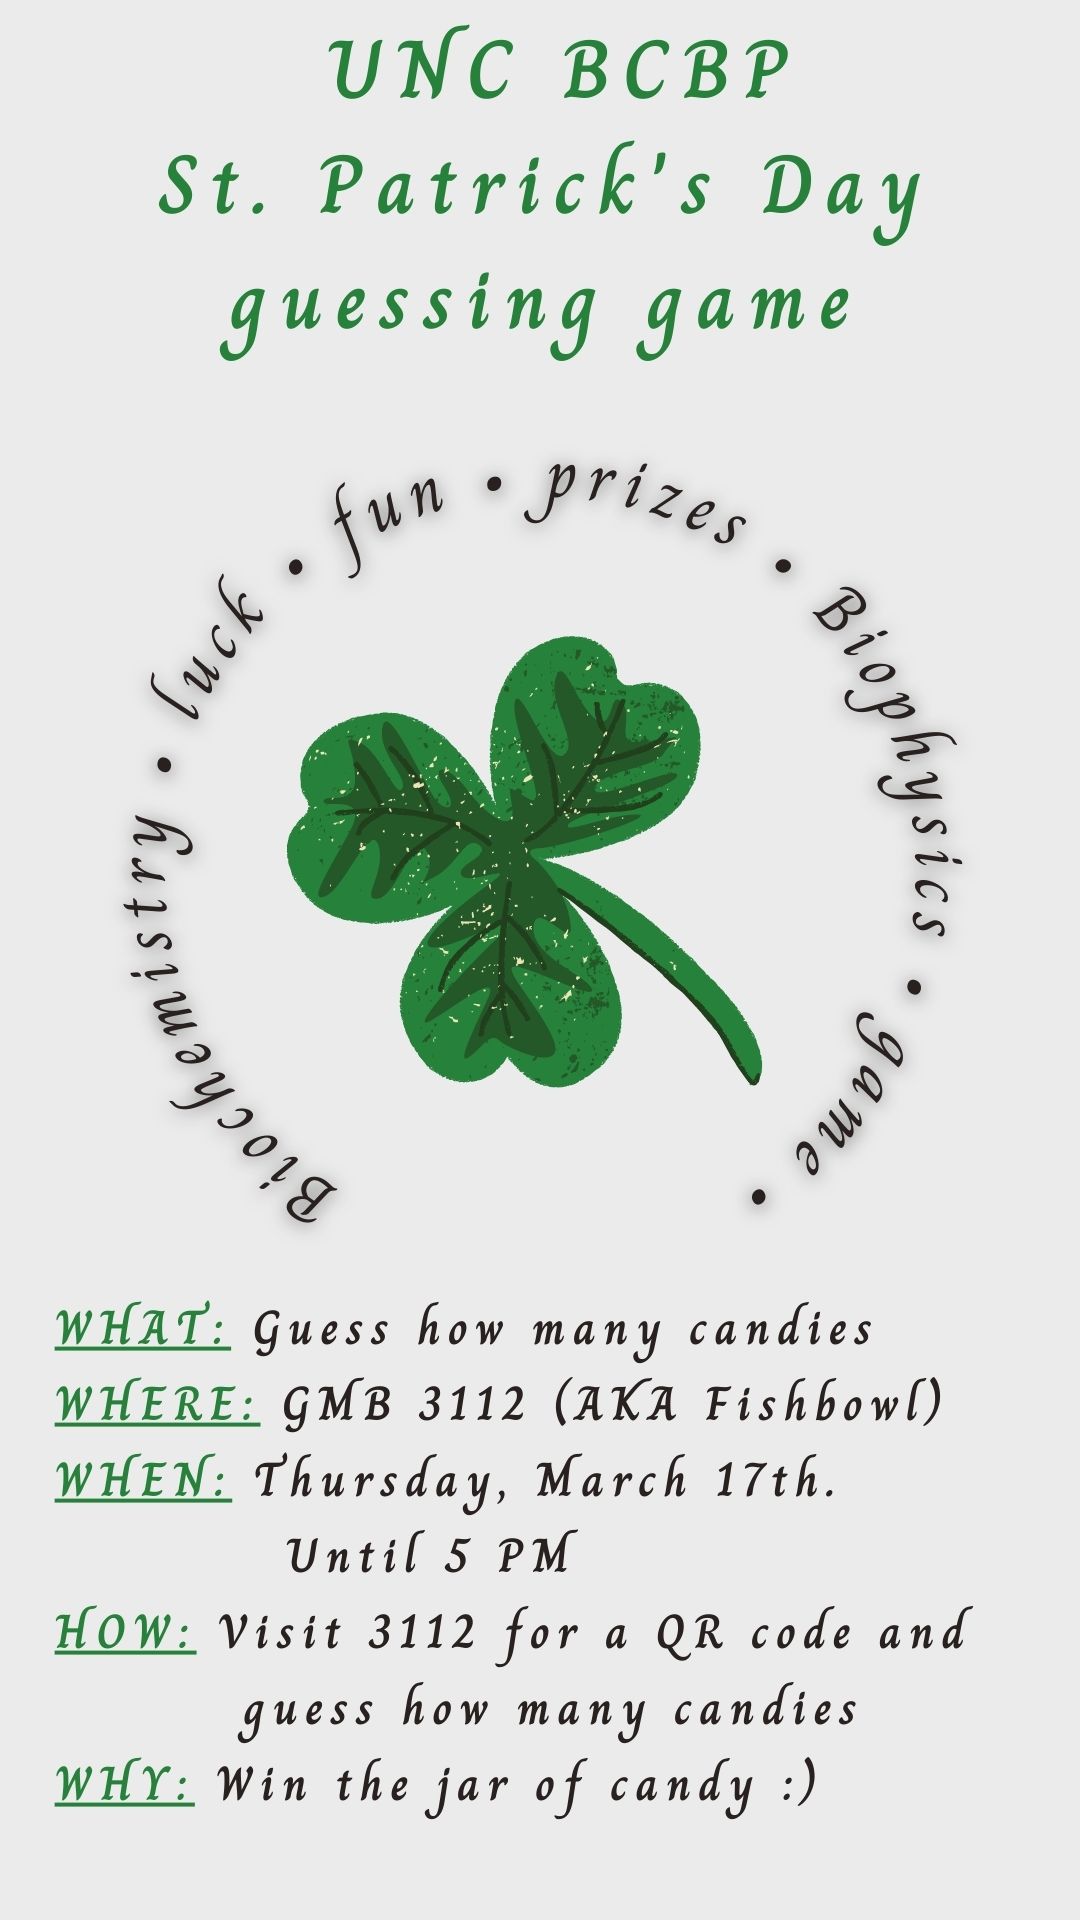 image Green Lucky Clover, text "UNC BCBP St Patrick's Day guessing game, biochemistry, luck, fun, prizes, biophysics, game. What: Guess how many candies, Where: GMB 3112 the fishbowl, When: Thursday March 17 until 5 PM, How: Visit 3112 for a QR ode and guess how many candies, Why: Win the jar of candy"